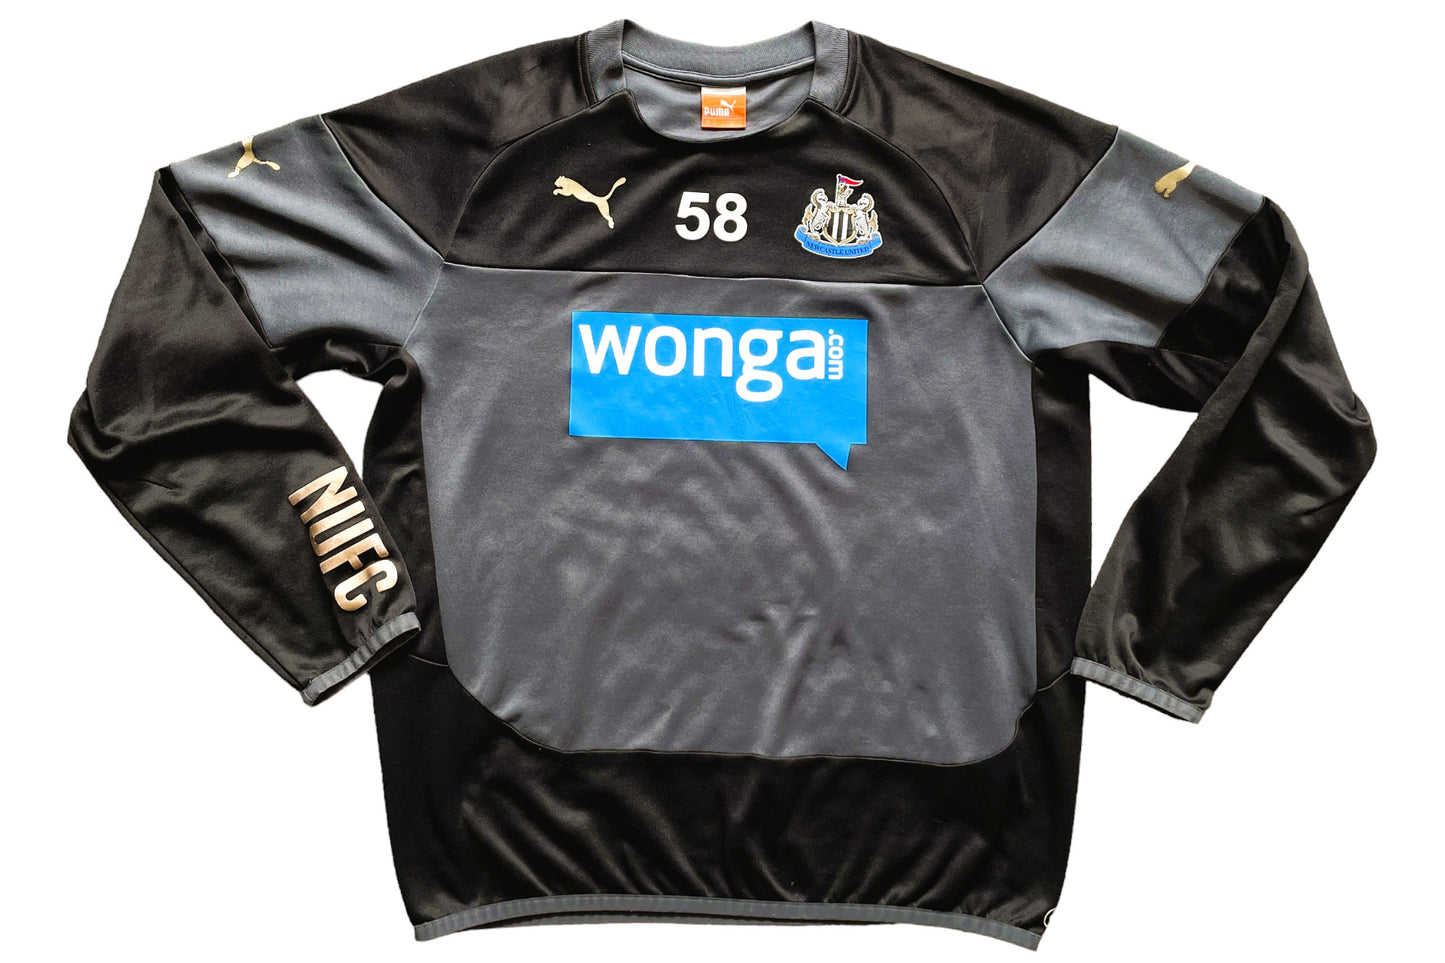 Newcastle Player Issue Training Shirt 2013/14 (good) Adults Large